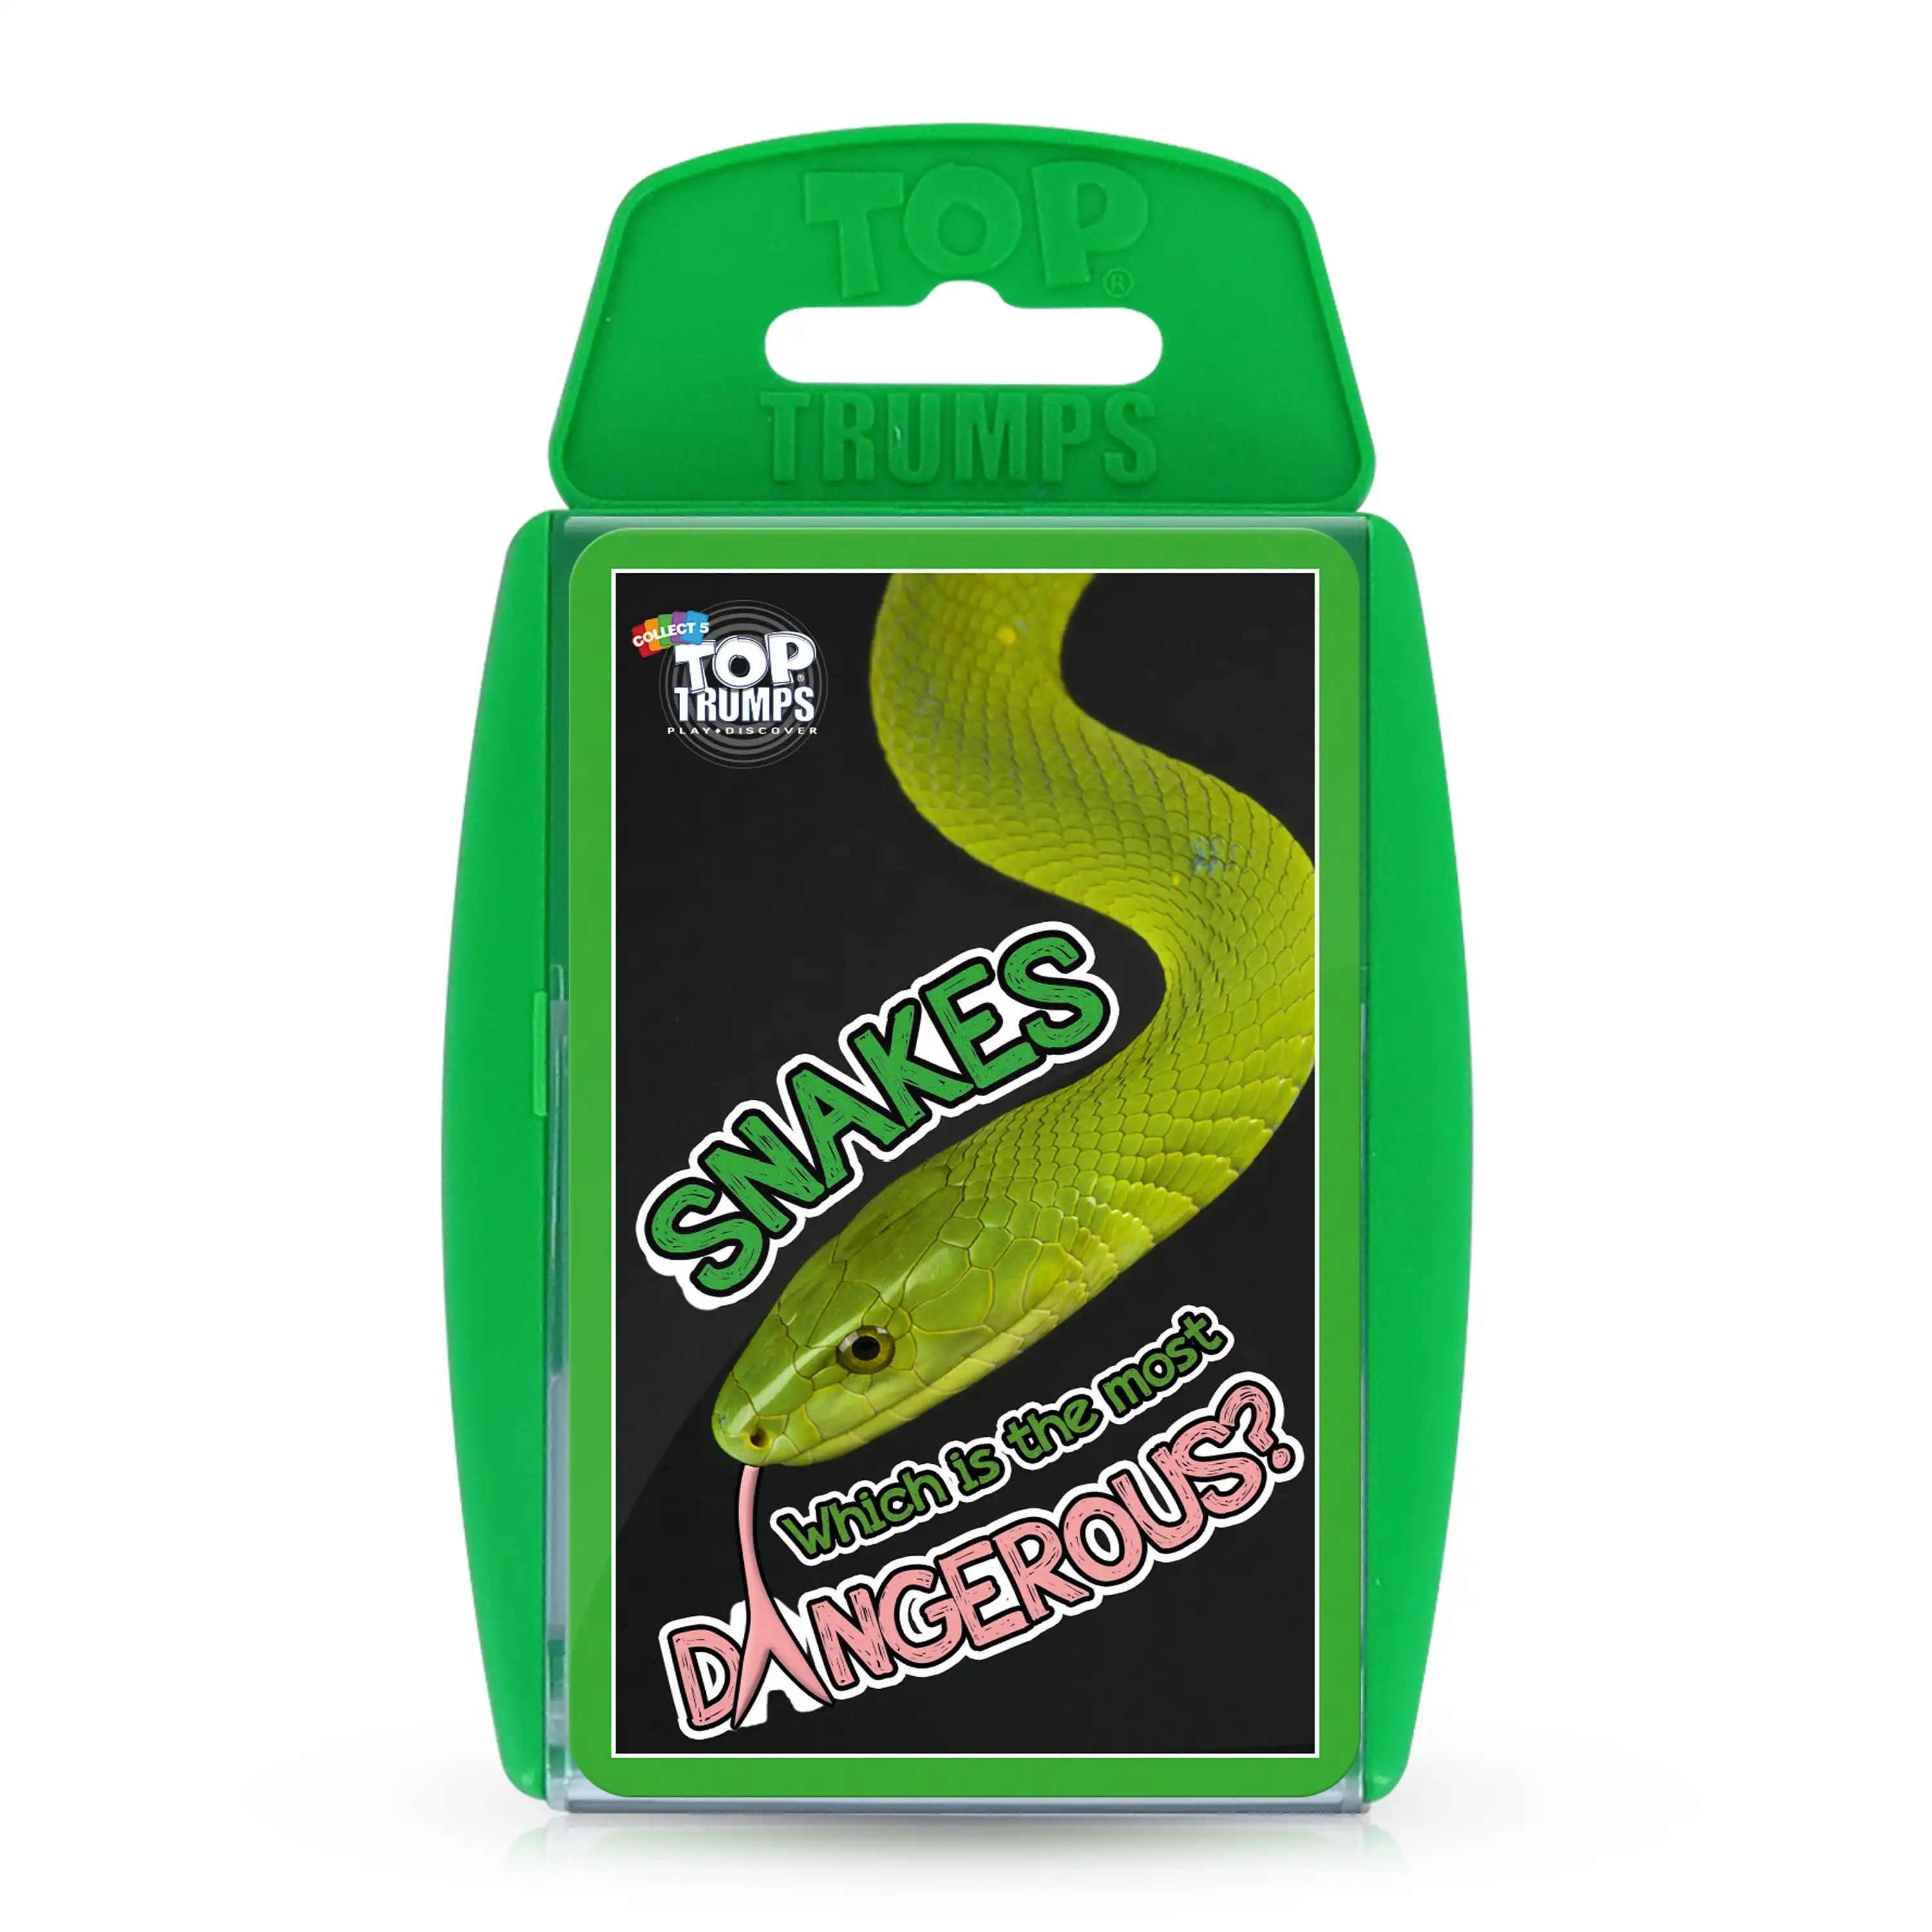 Top Trumps Cards, Snakes